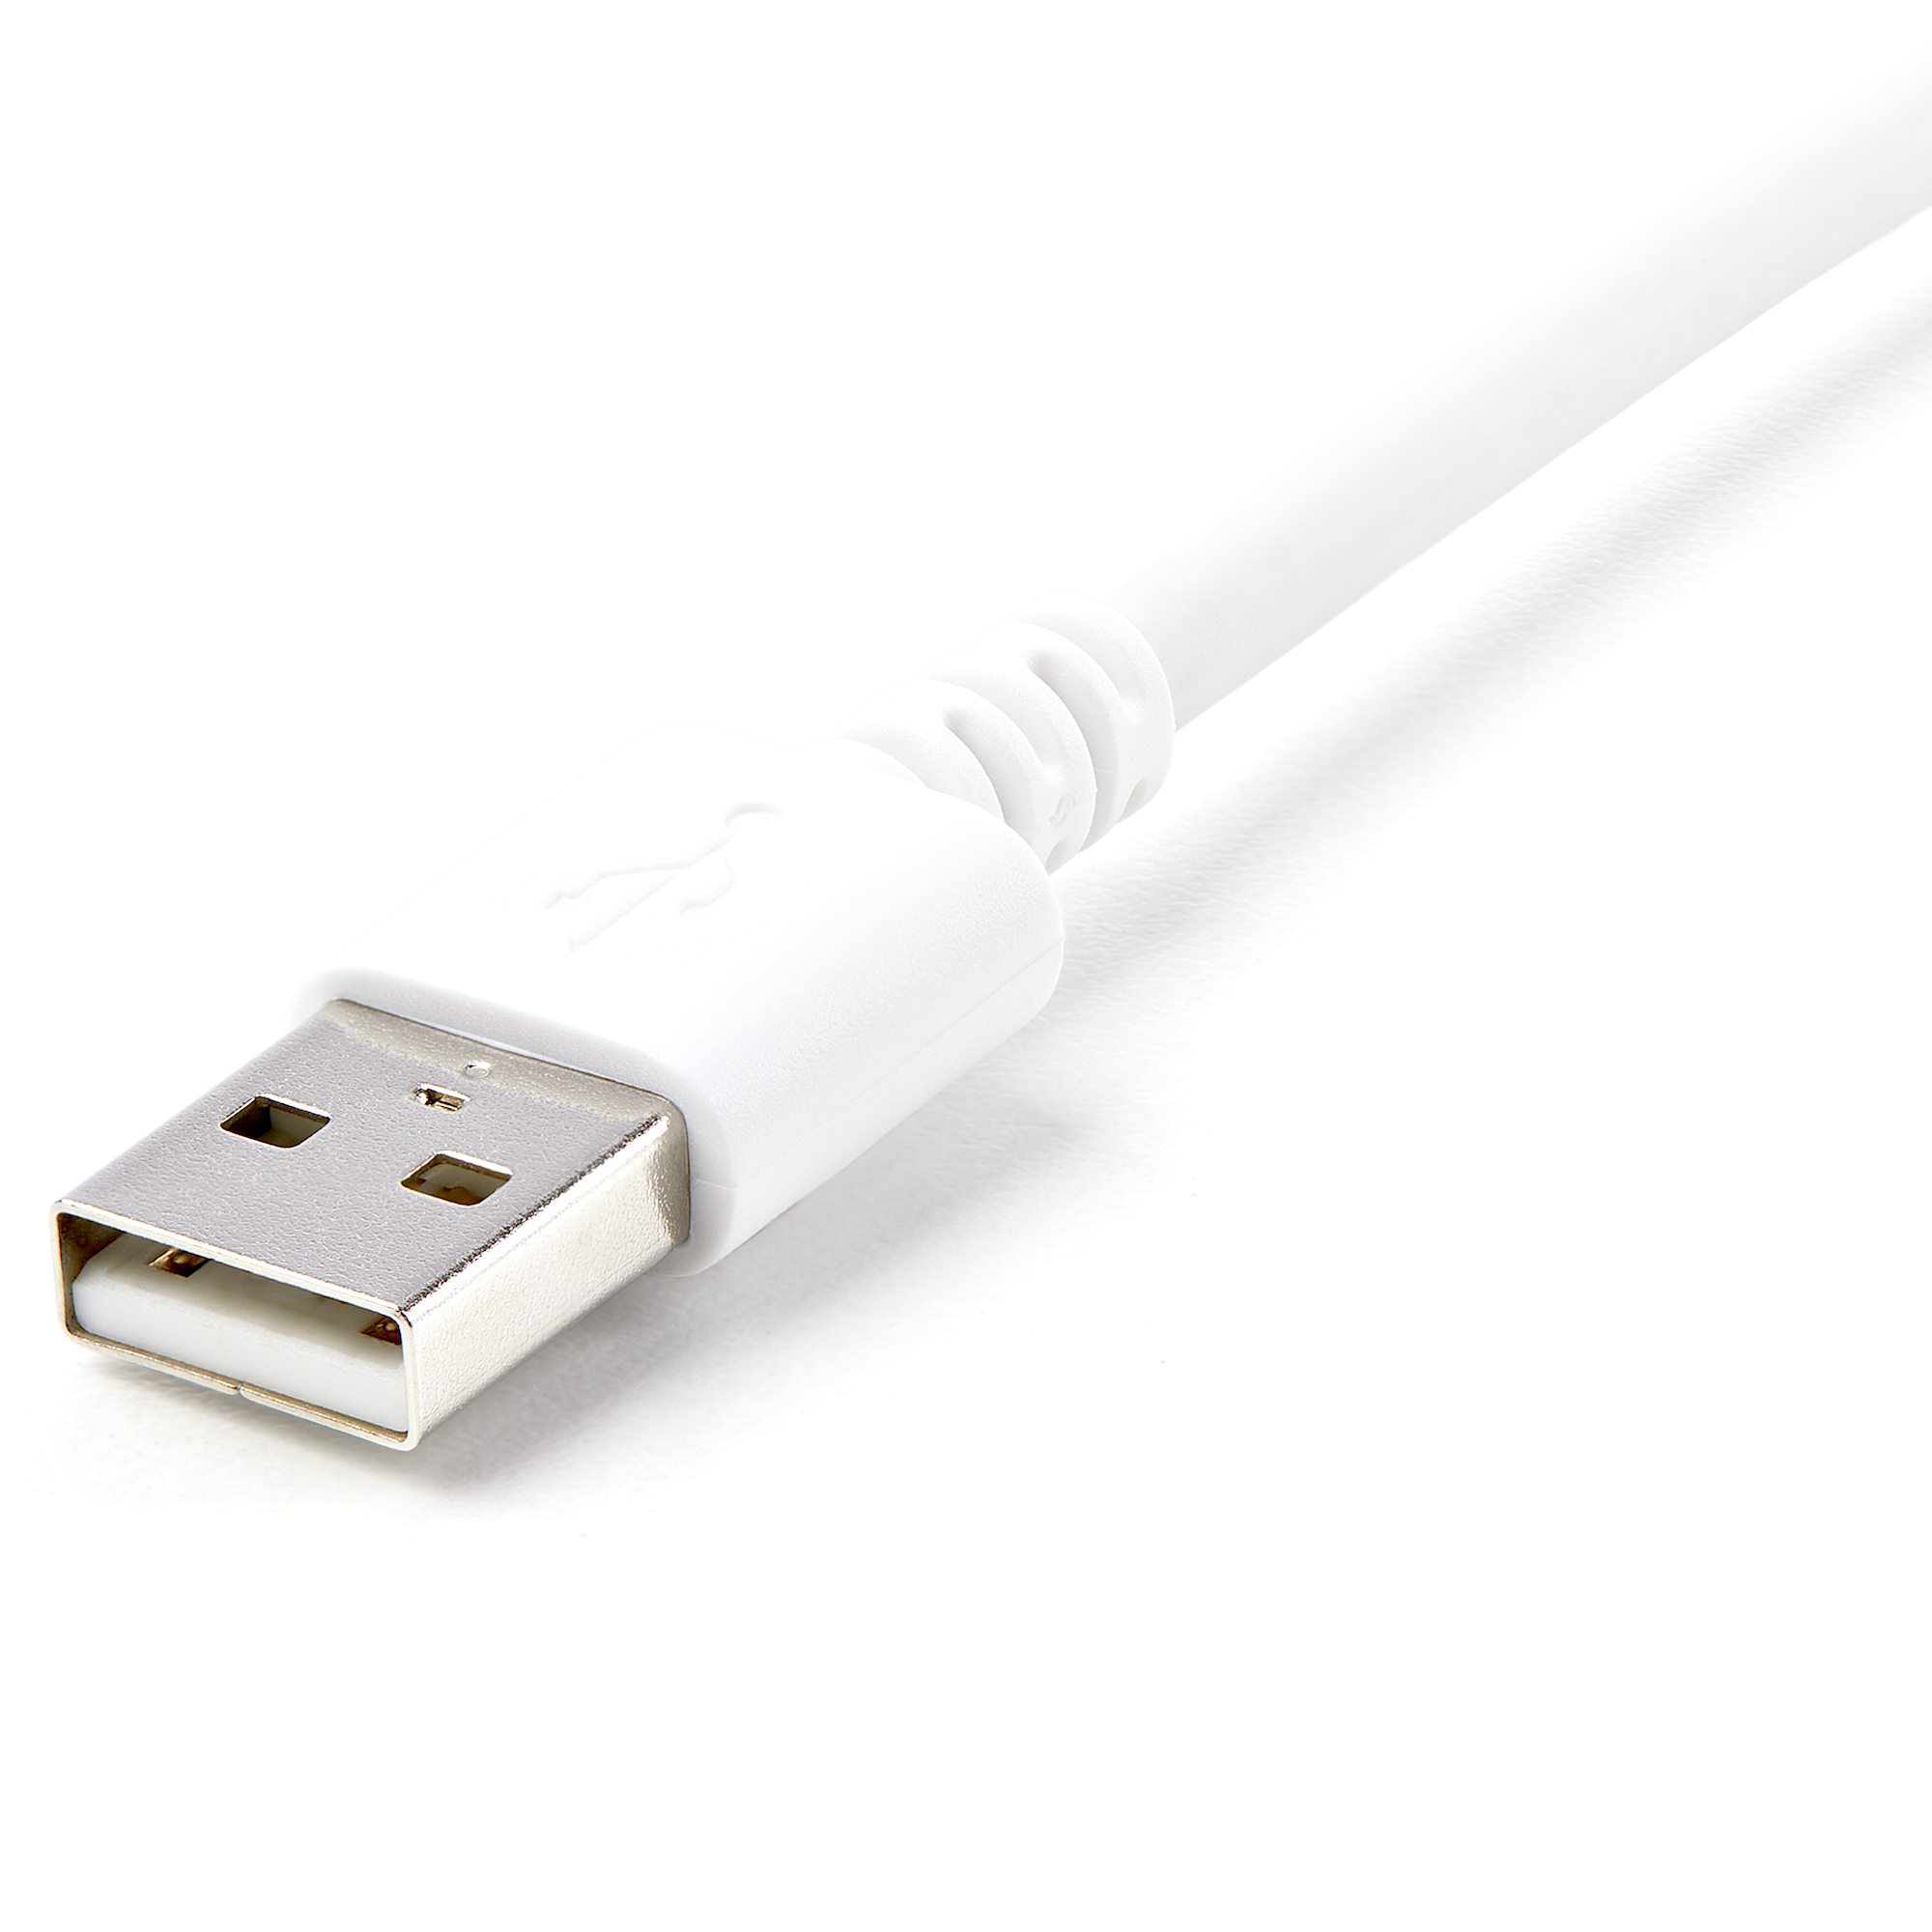 10 ft White 8-pin Lightning to USB Cable - Lightning Cables